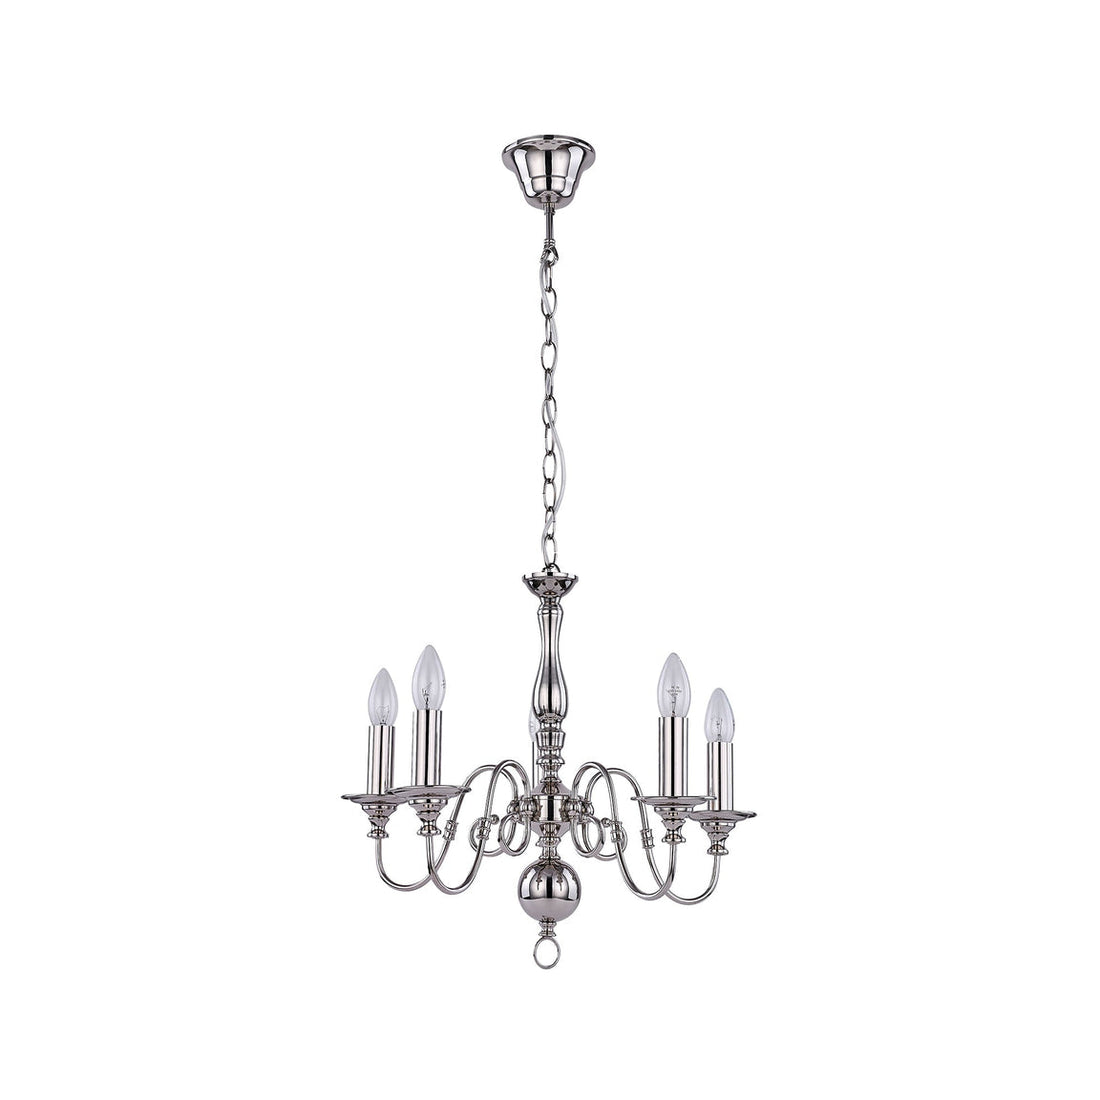 Ganeed 5 Light Satin Chrome Traditional Industrial Chandelier